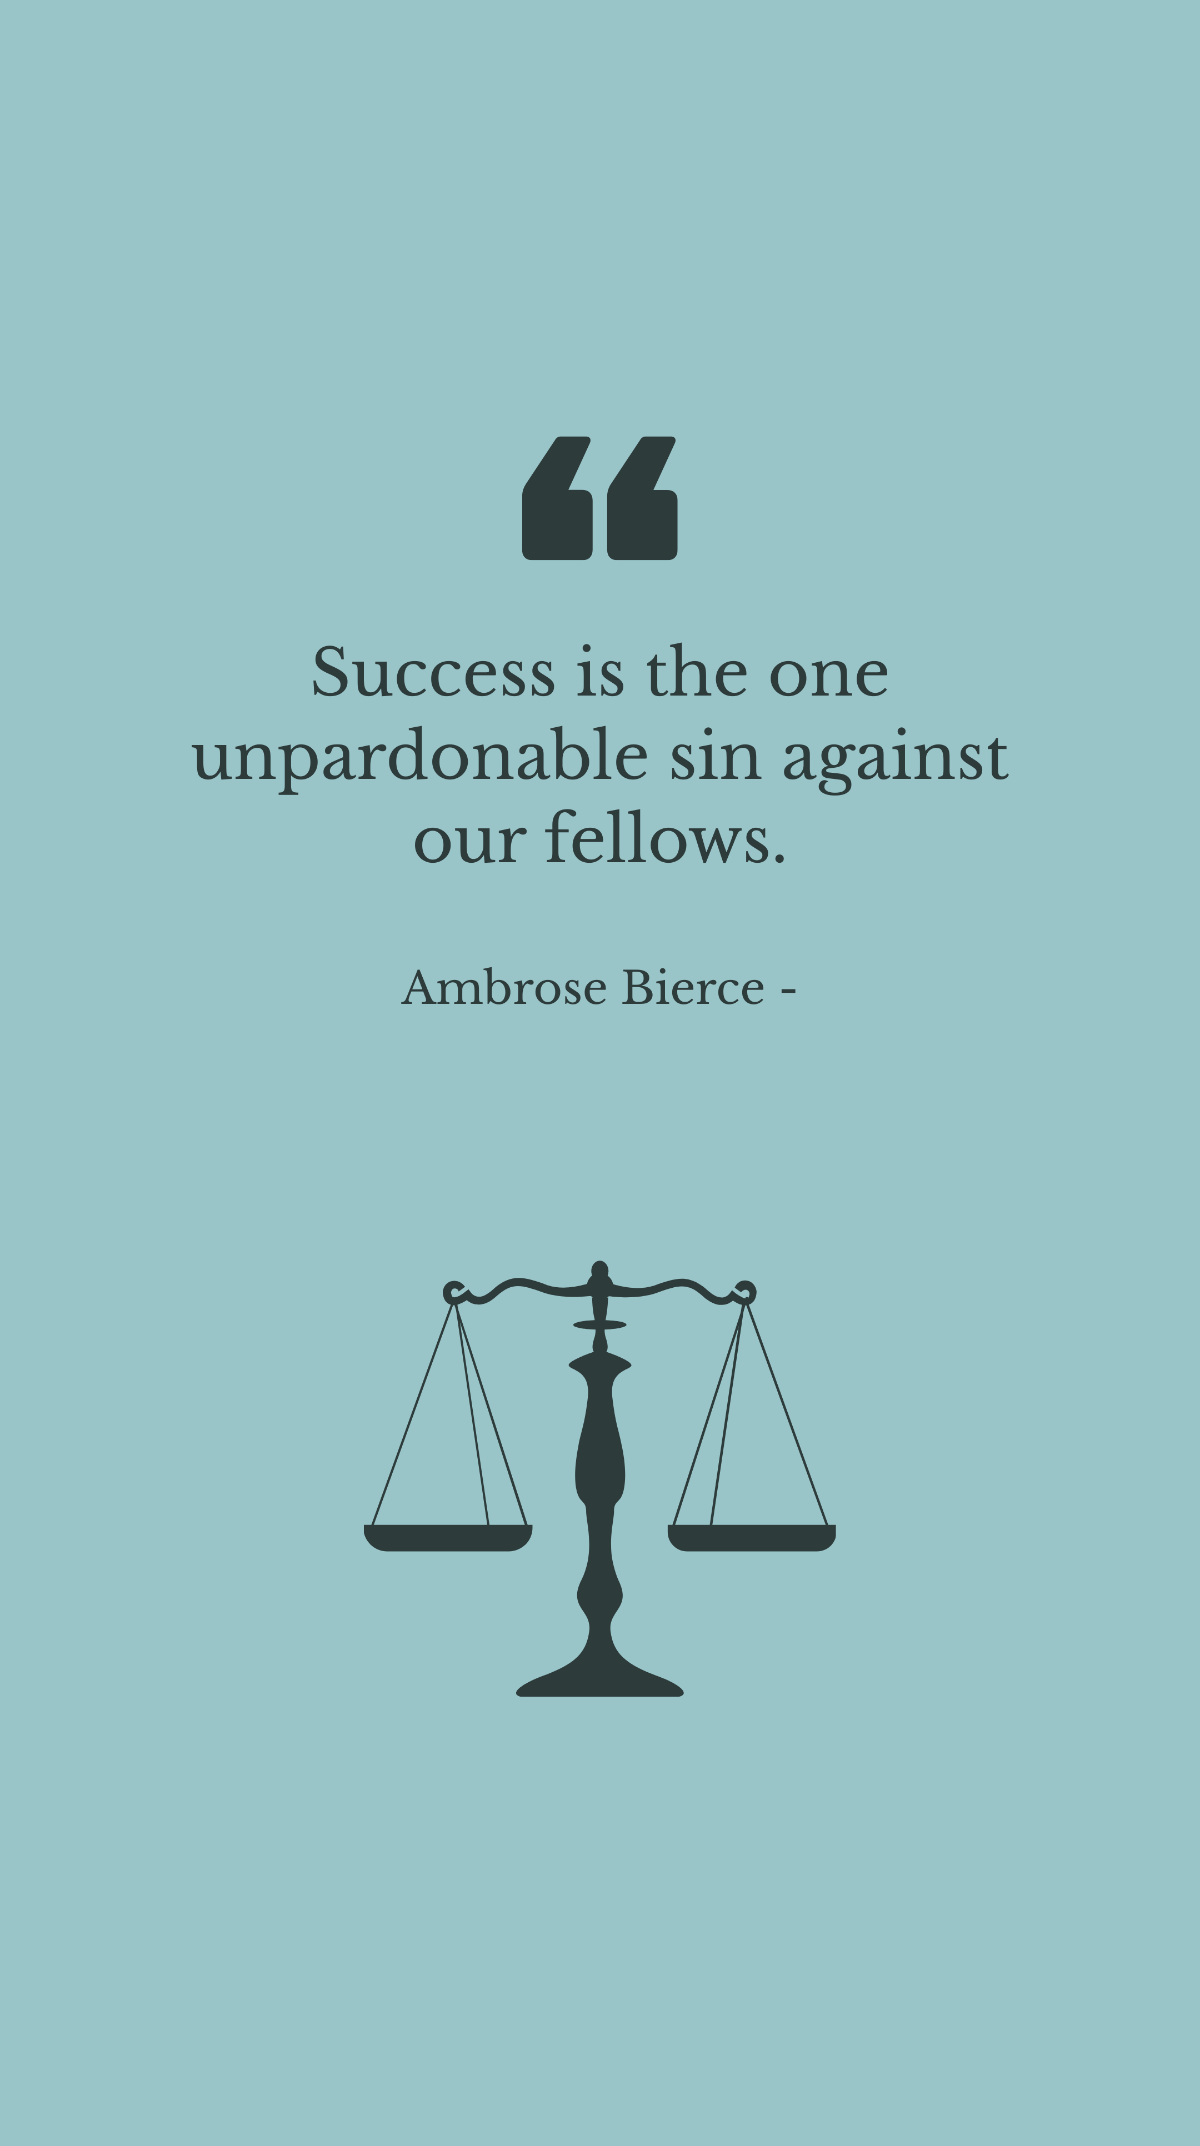 Ambrose Bierce - Success is the one unpardonable sin against our fellows.